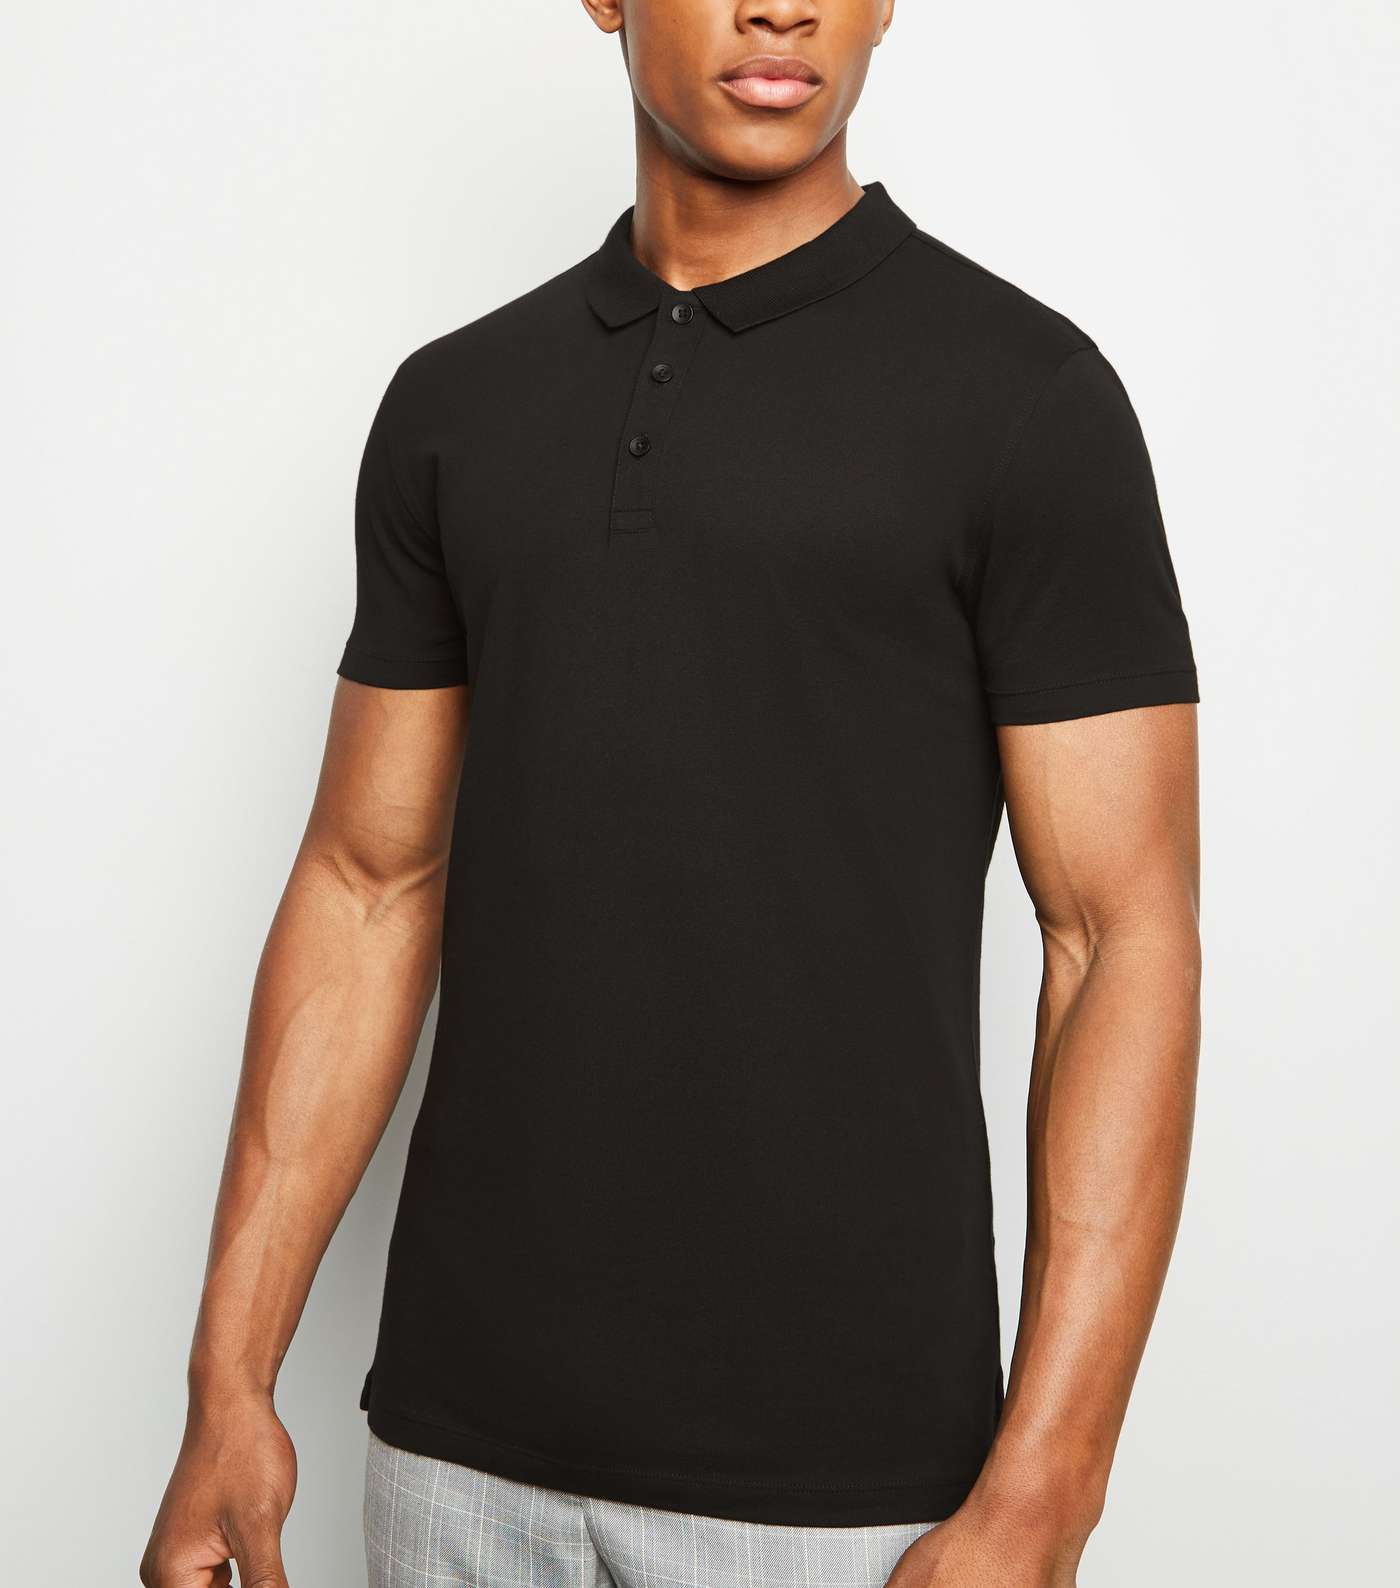 Black Muscle Fit Polo Shirt